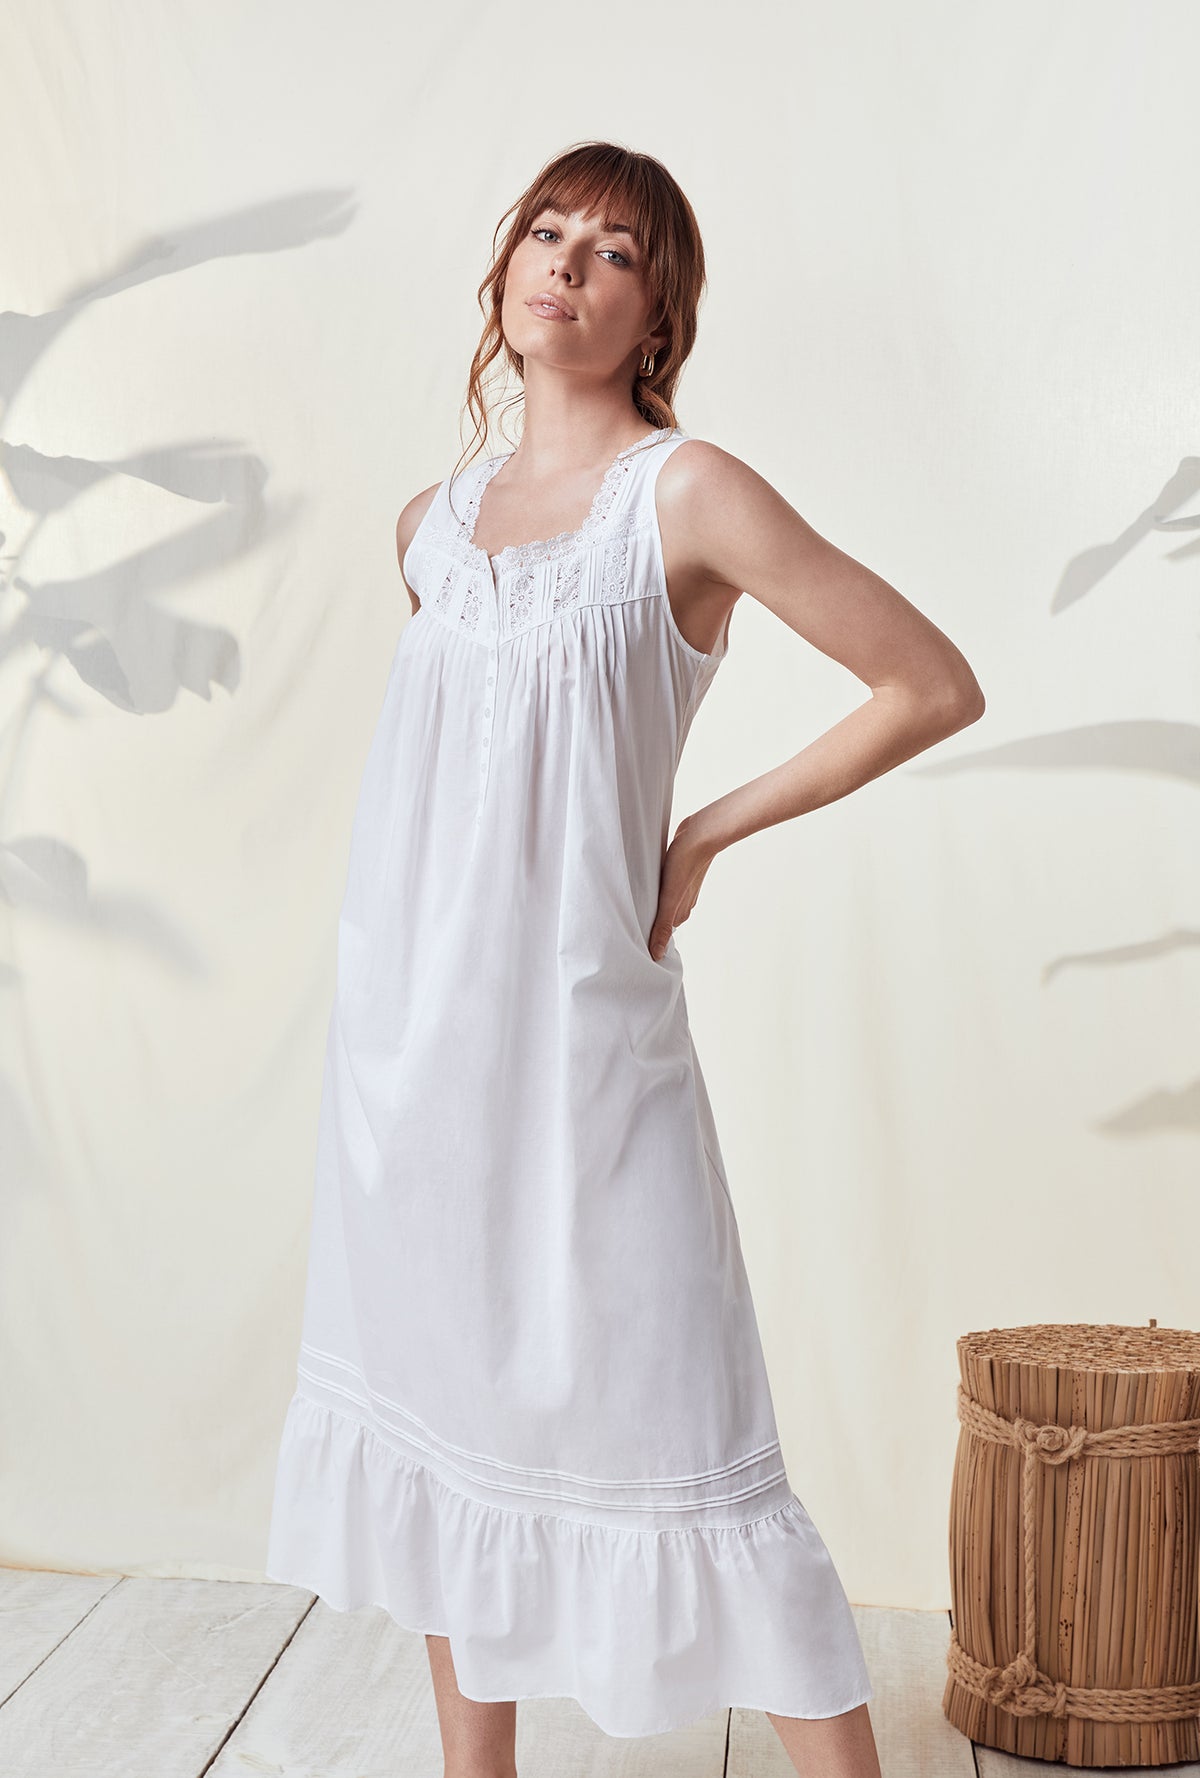 A lady wearing a white sleeveless nightgown.